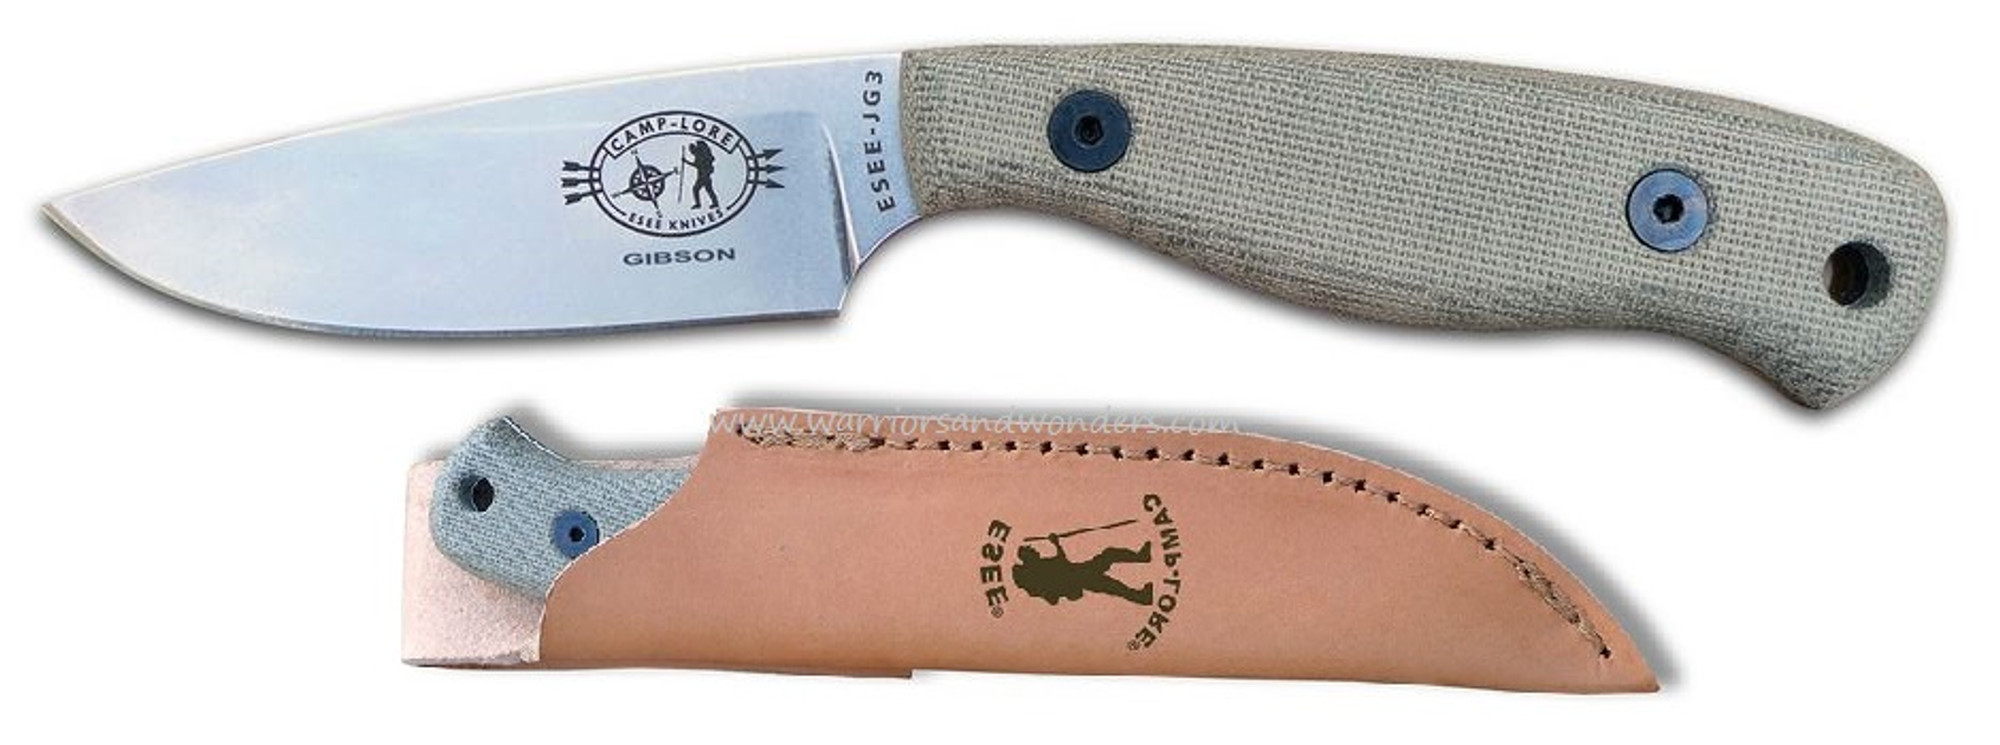 ESEE JG3 Camp-Lore by James Gibson with Leather Sheath